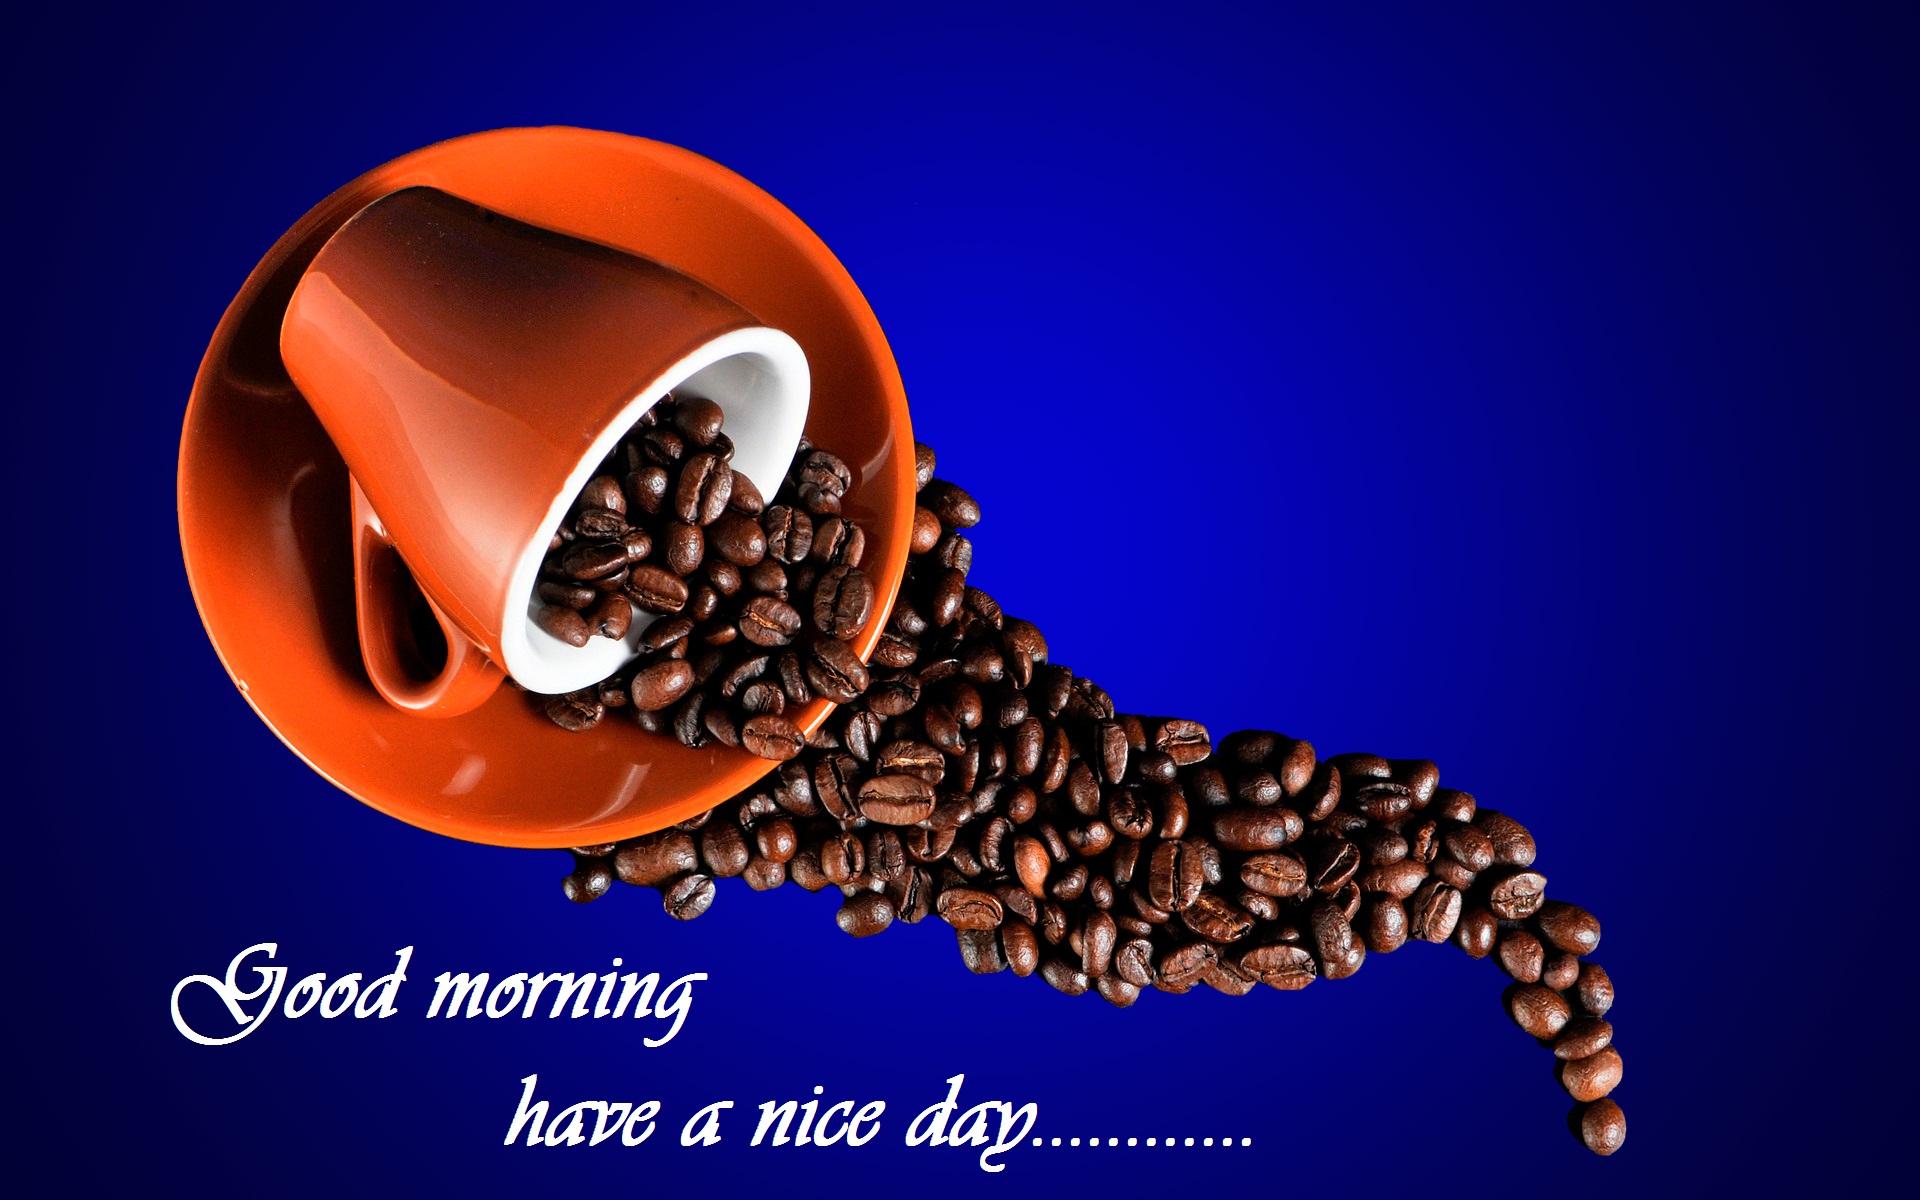 Good Morning Coffee Wishes Wallpapers And Backgrounds - Good Morning With Dry Fruits - HD Wallpaper 